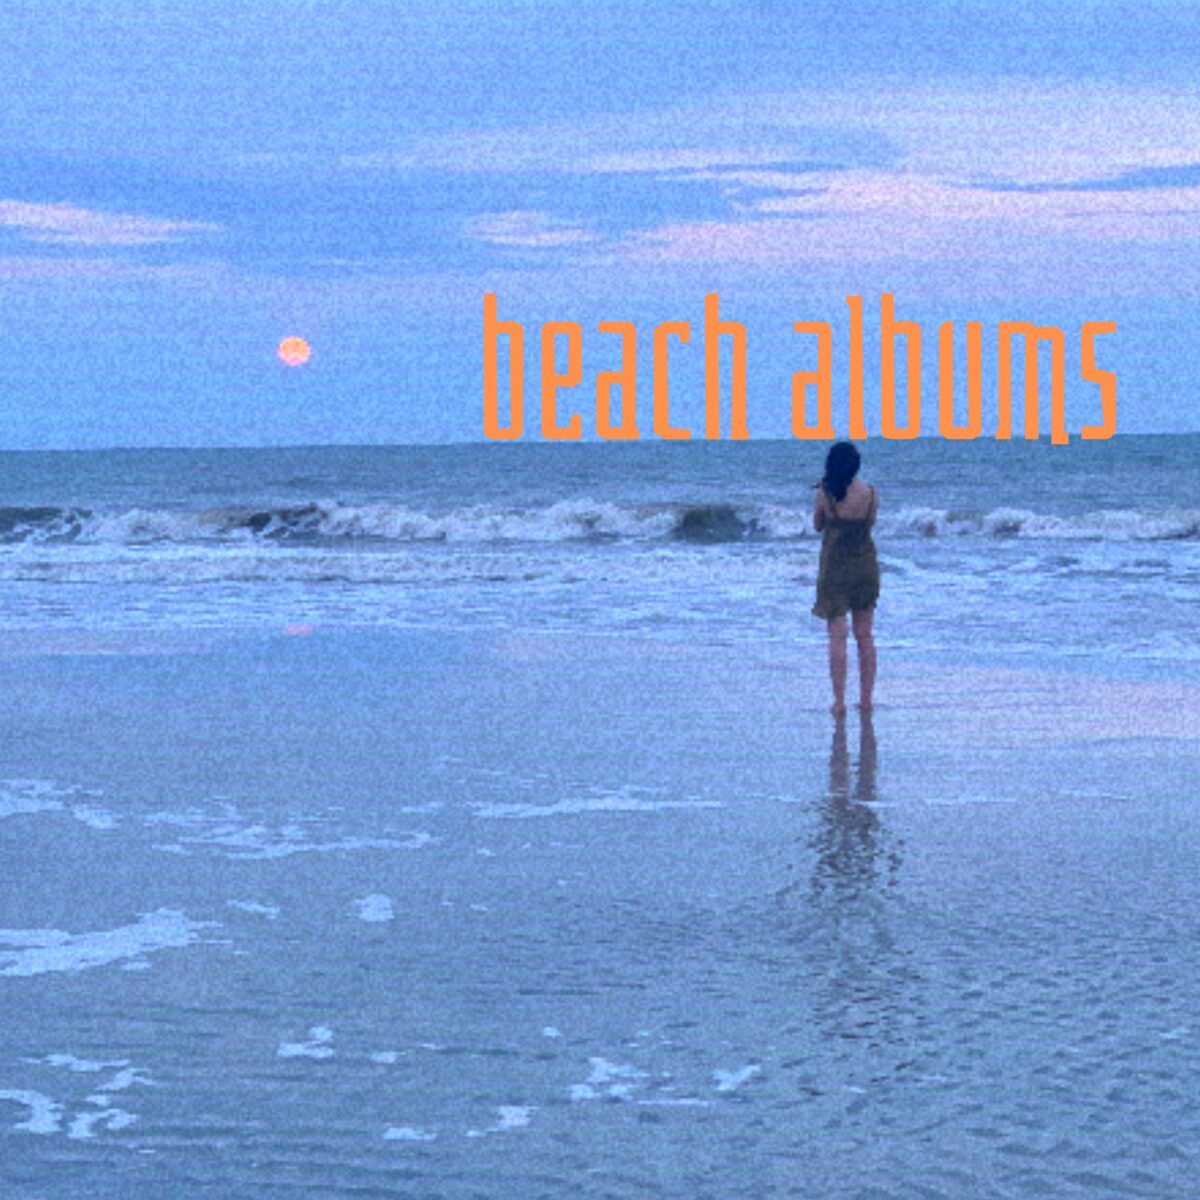 A person standing at the shore of the beach and the moon in the background. Orange text that reads "beach albums."